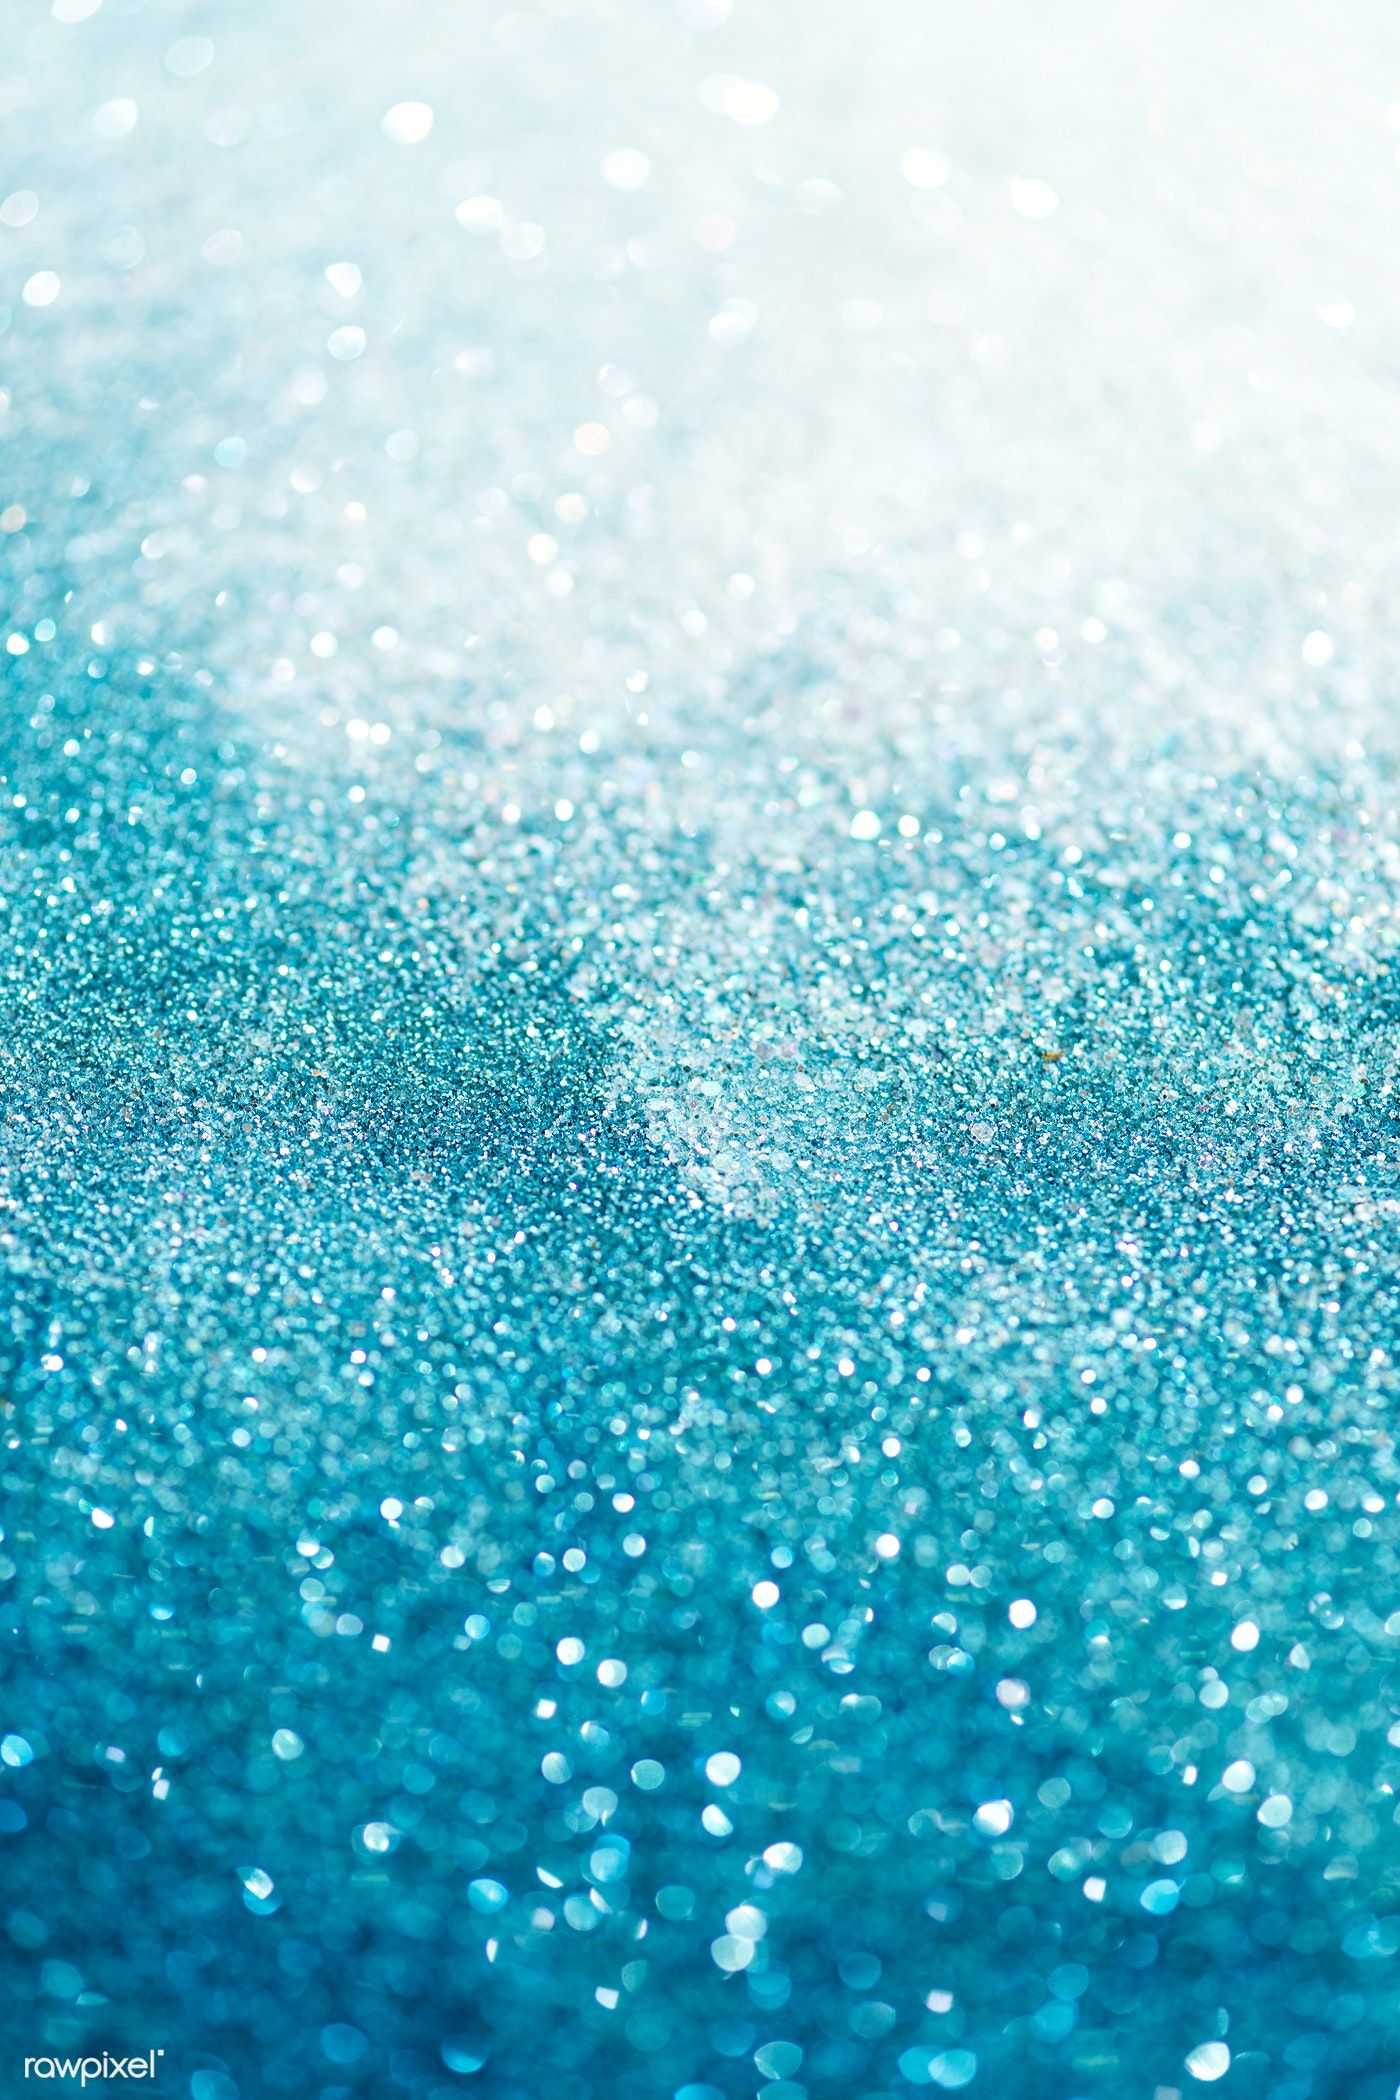 Sparkly teal glitter background. free image / Teddy Rawpixel. Glitter phone wallpaper, Blue sparkle background, Blue glitter background